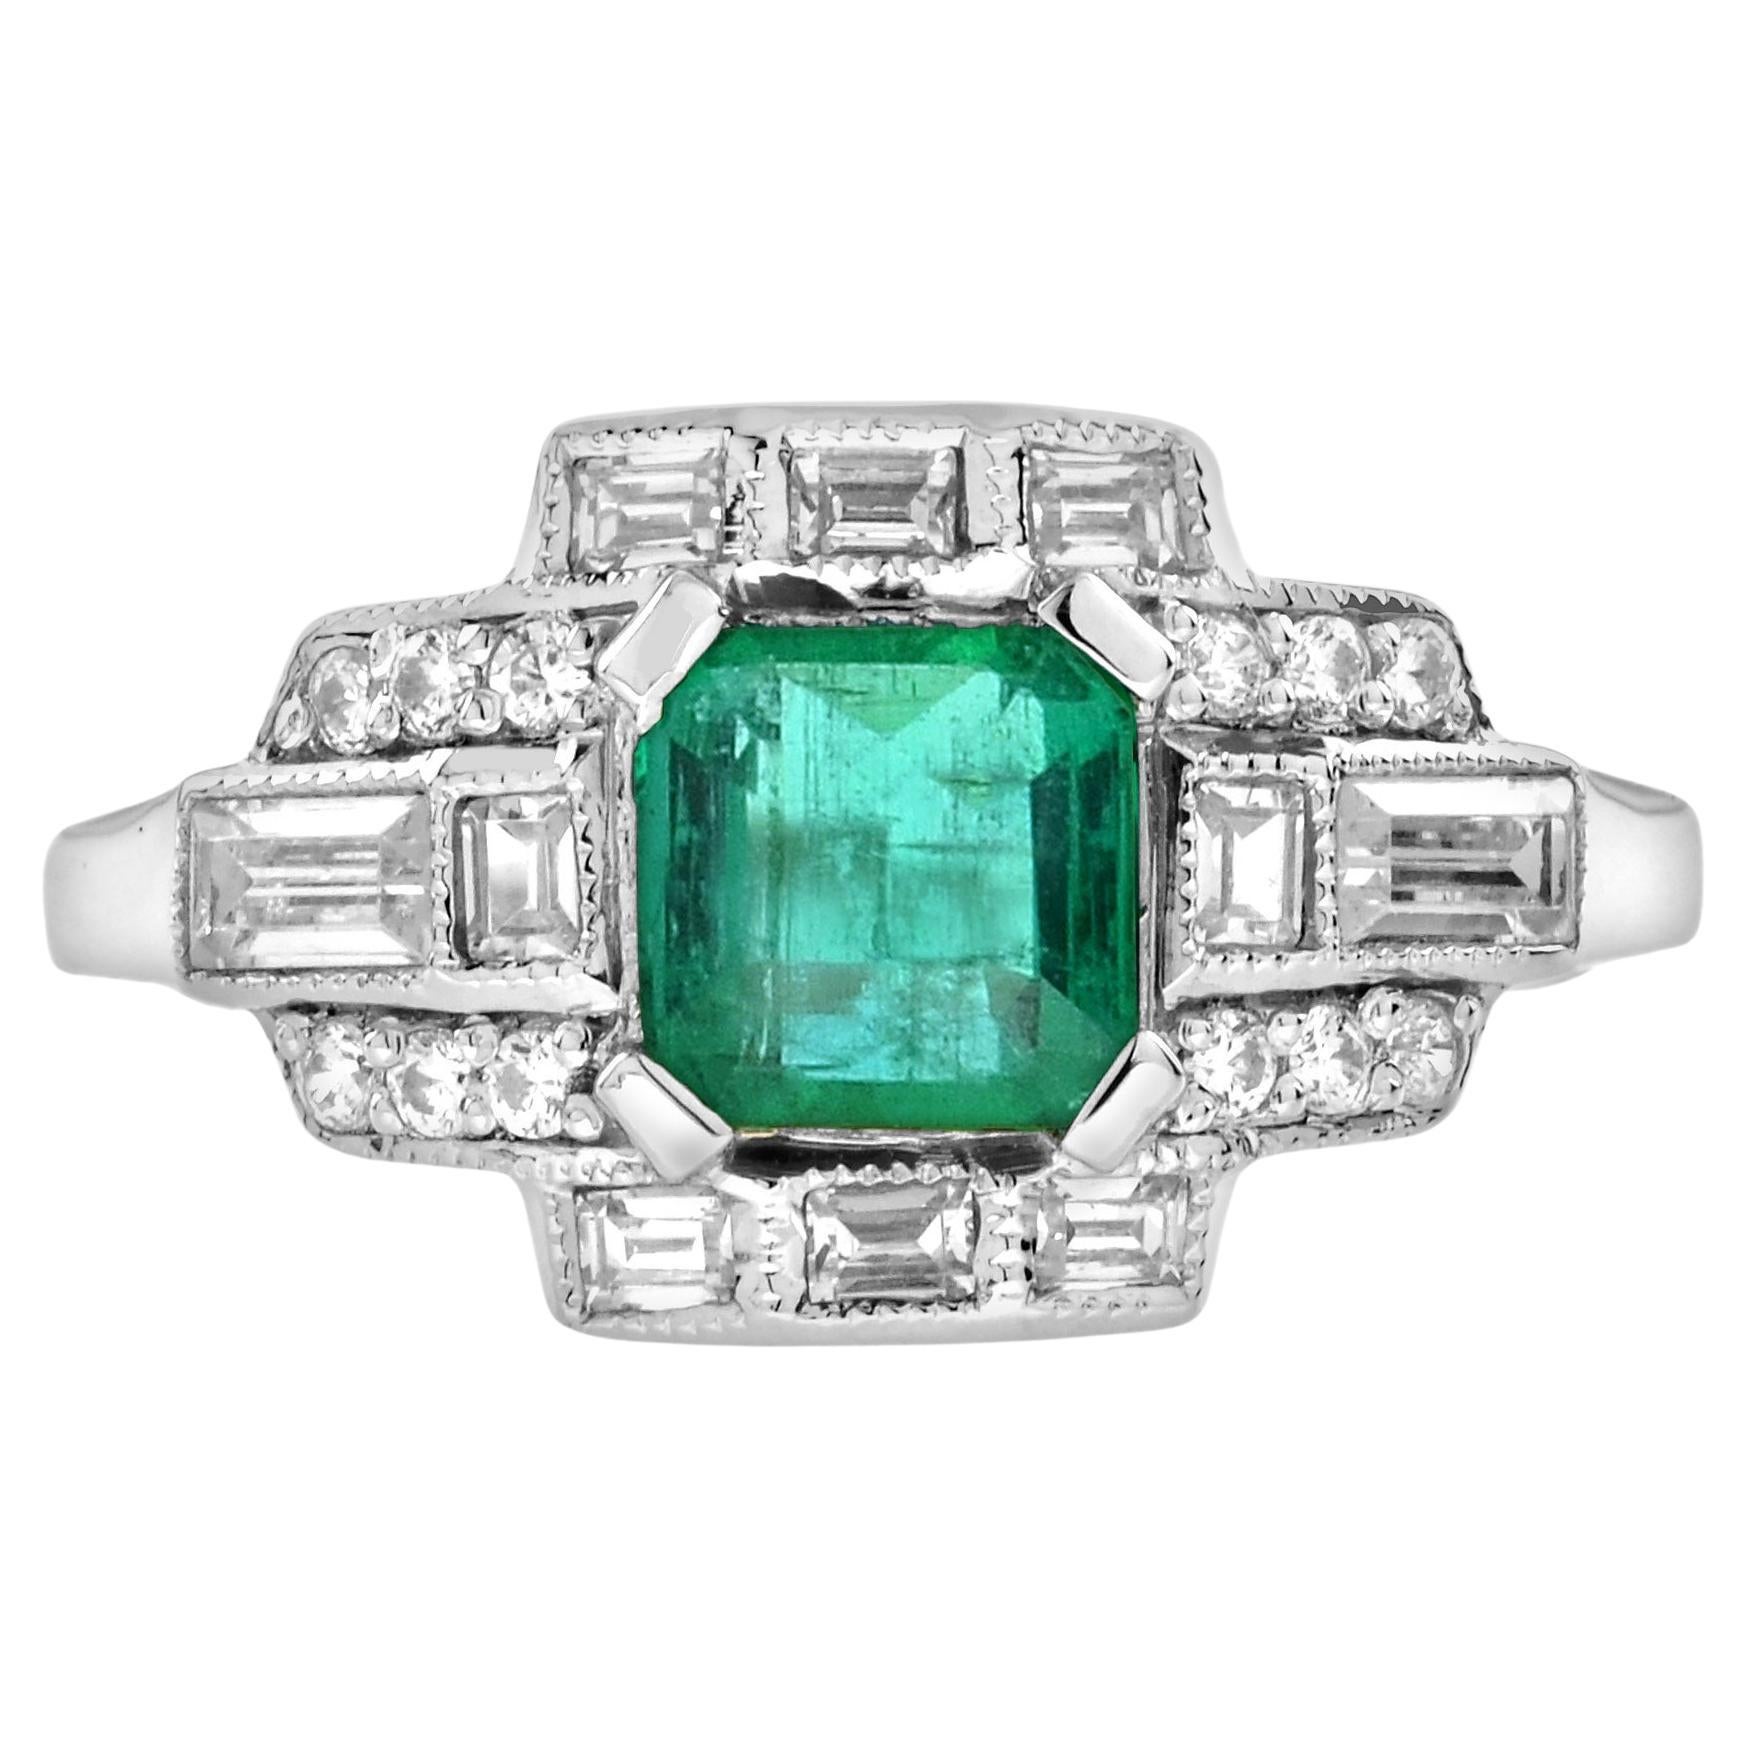 1.65 Ct. Emerald and Diamond Art Deco Style Engagement Ring in 18K White Gold For Sale